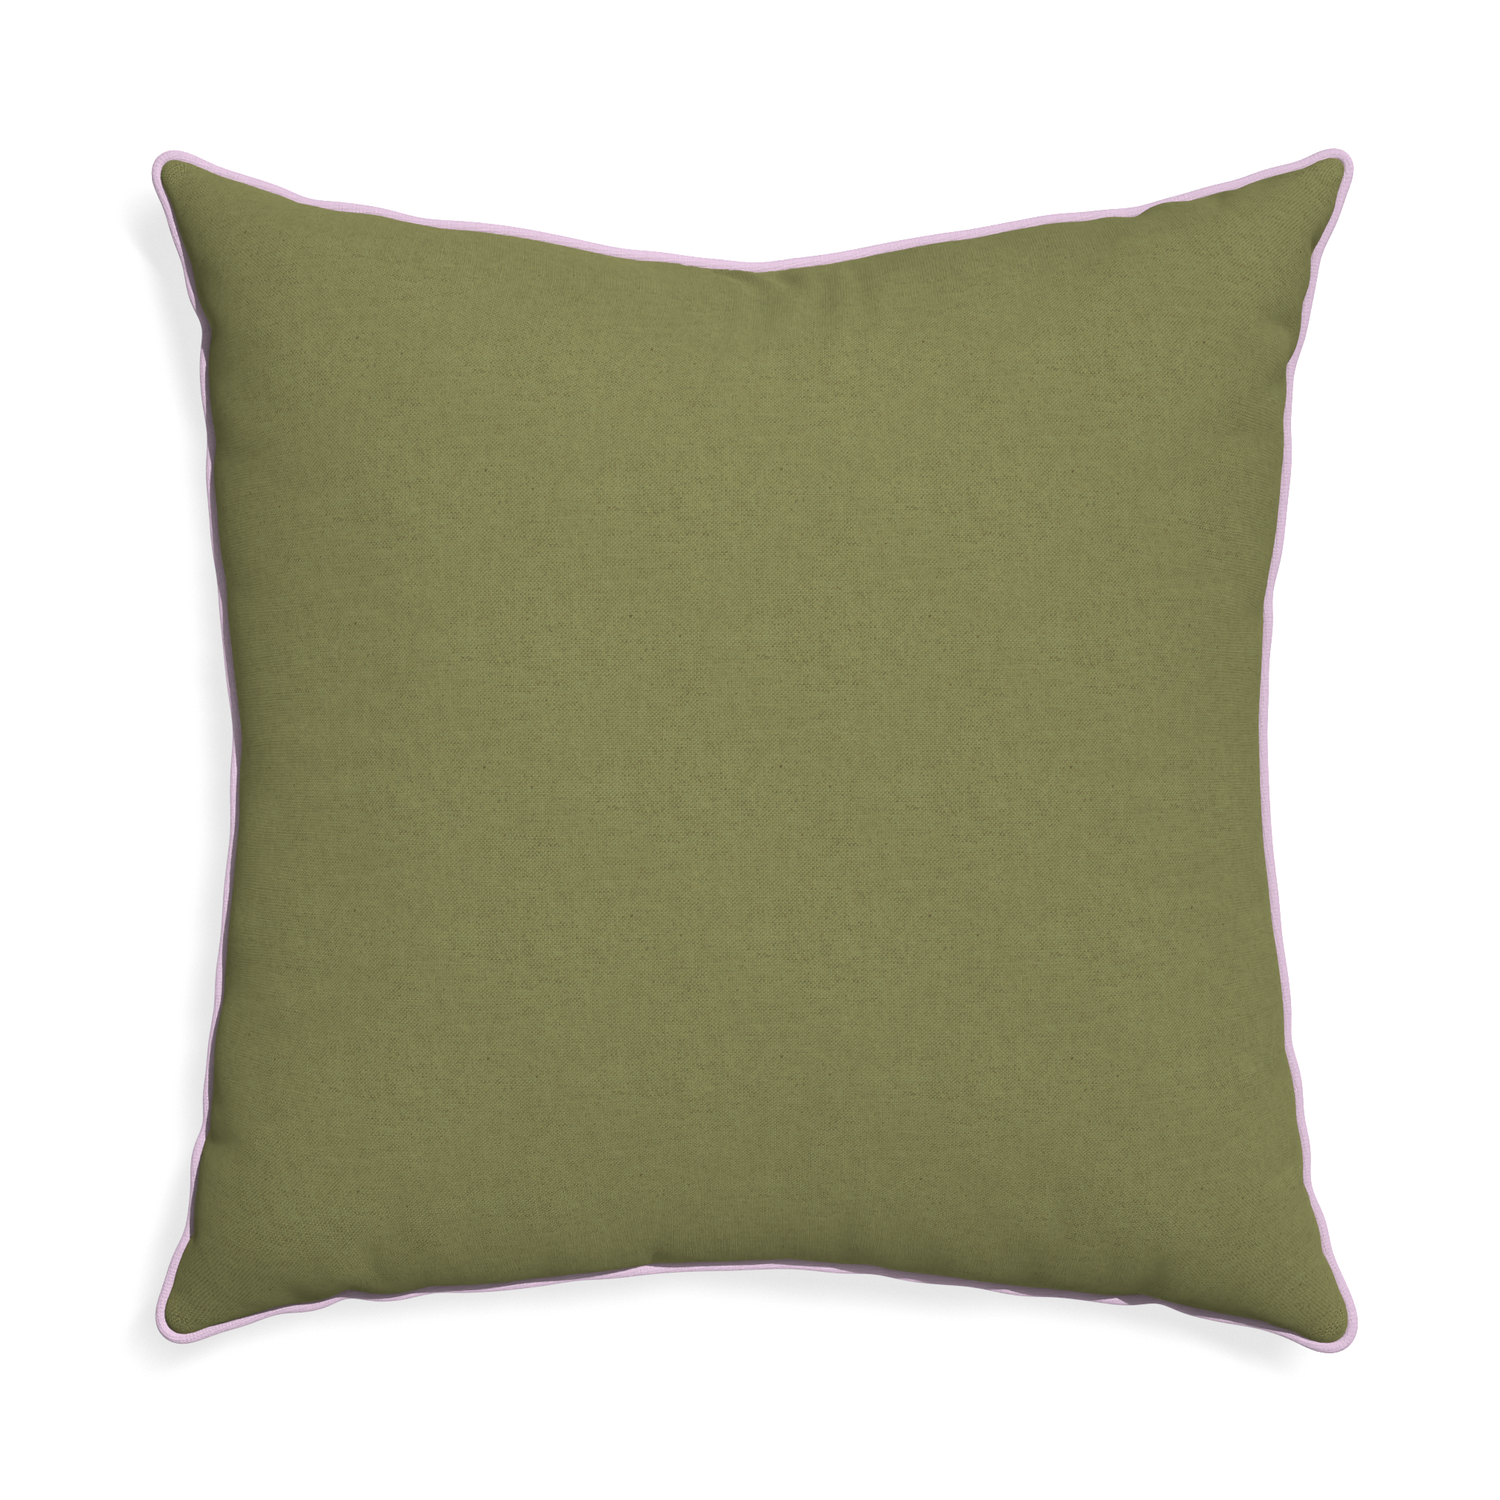 Euro-sham moss custom moss greenpillow with l piping on white background